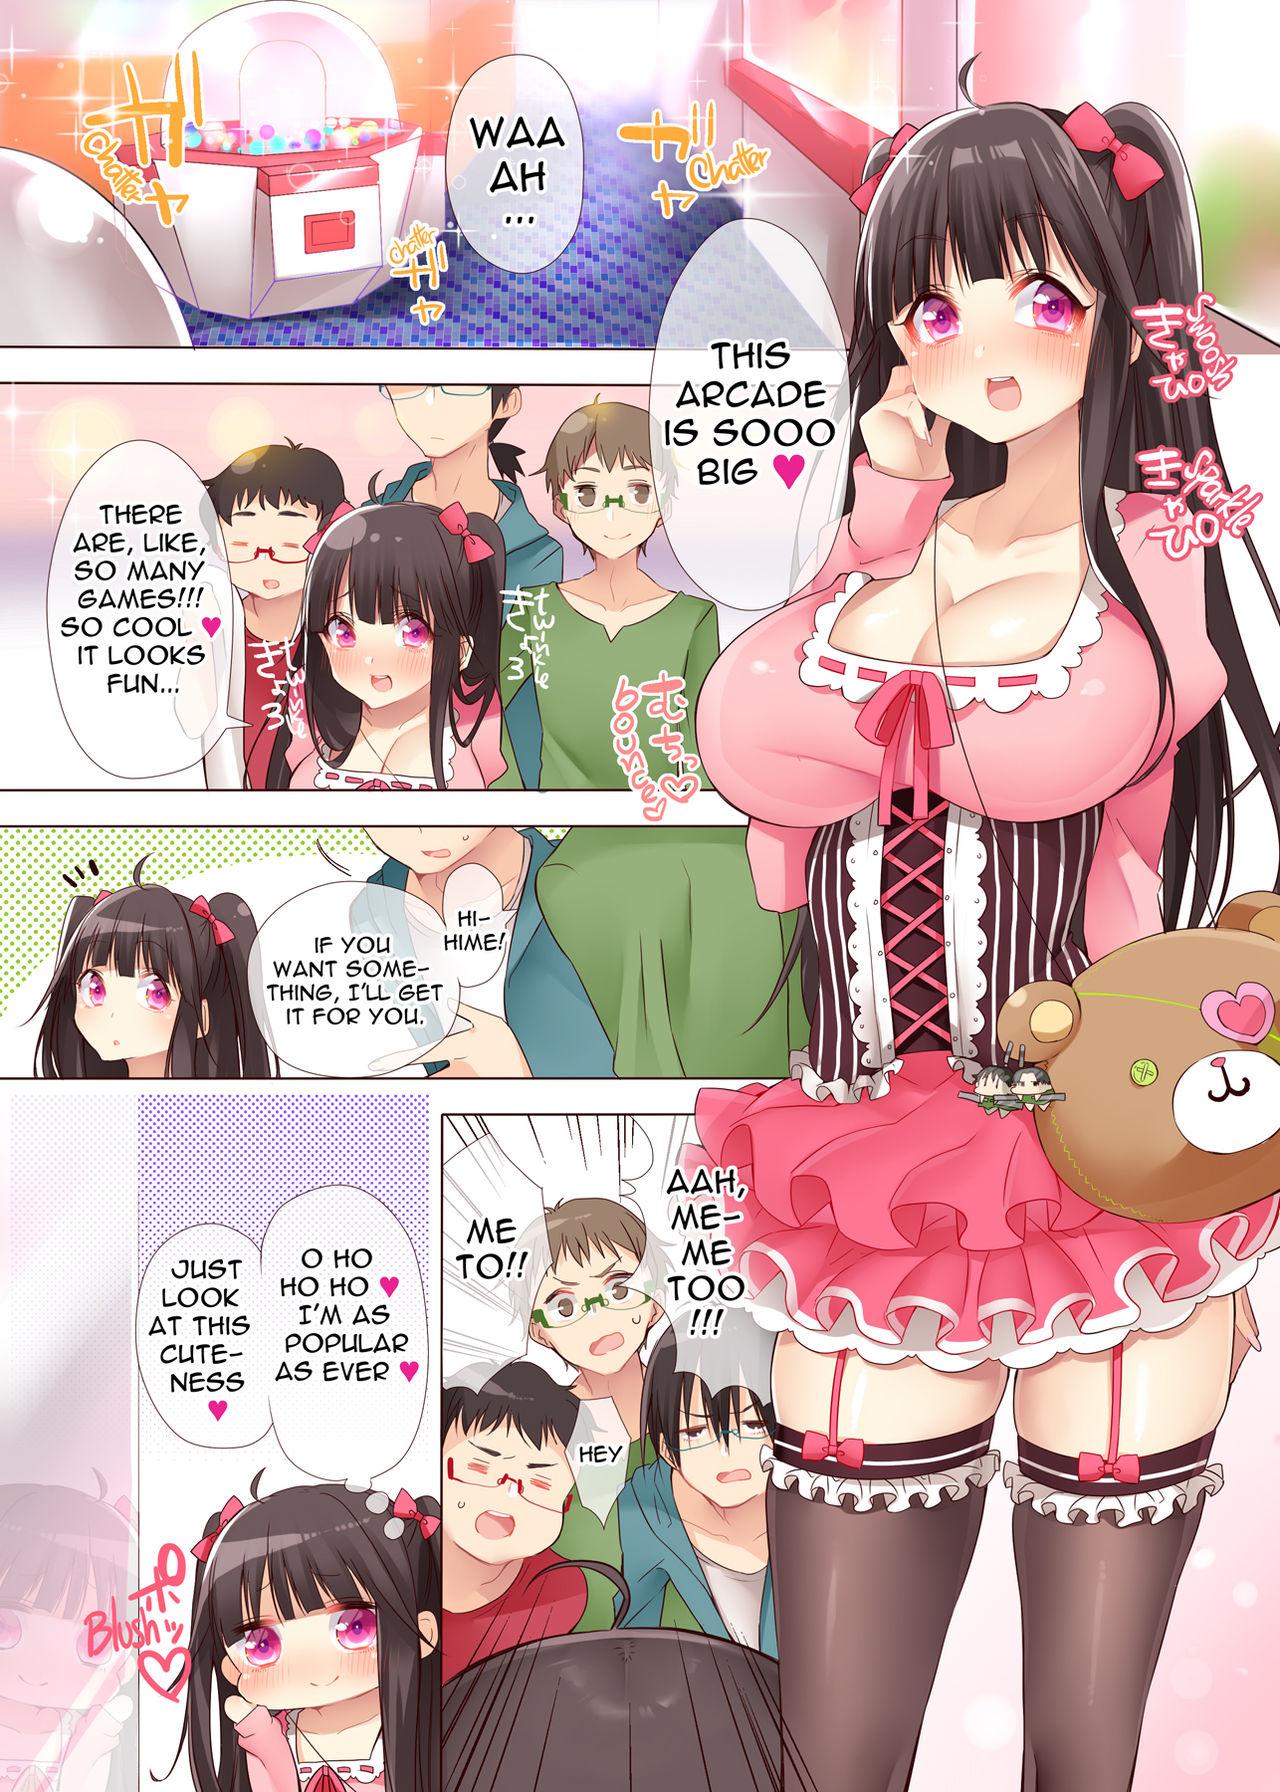 Pink Pussy The Princess of an Otaku Group Got Knocked Up by Some Piece of Trash So She Let an Otaku Guy Do Her Too!? Stepbrother - Page 2